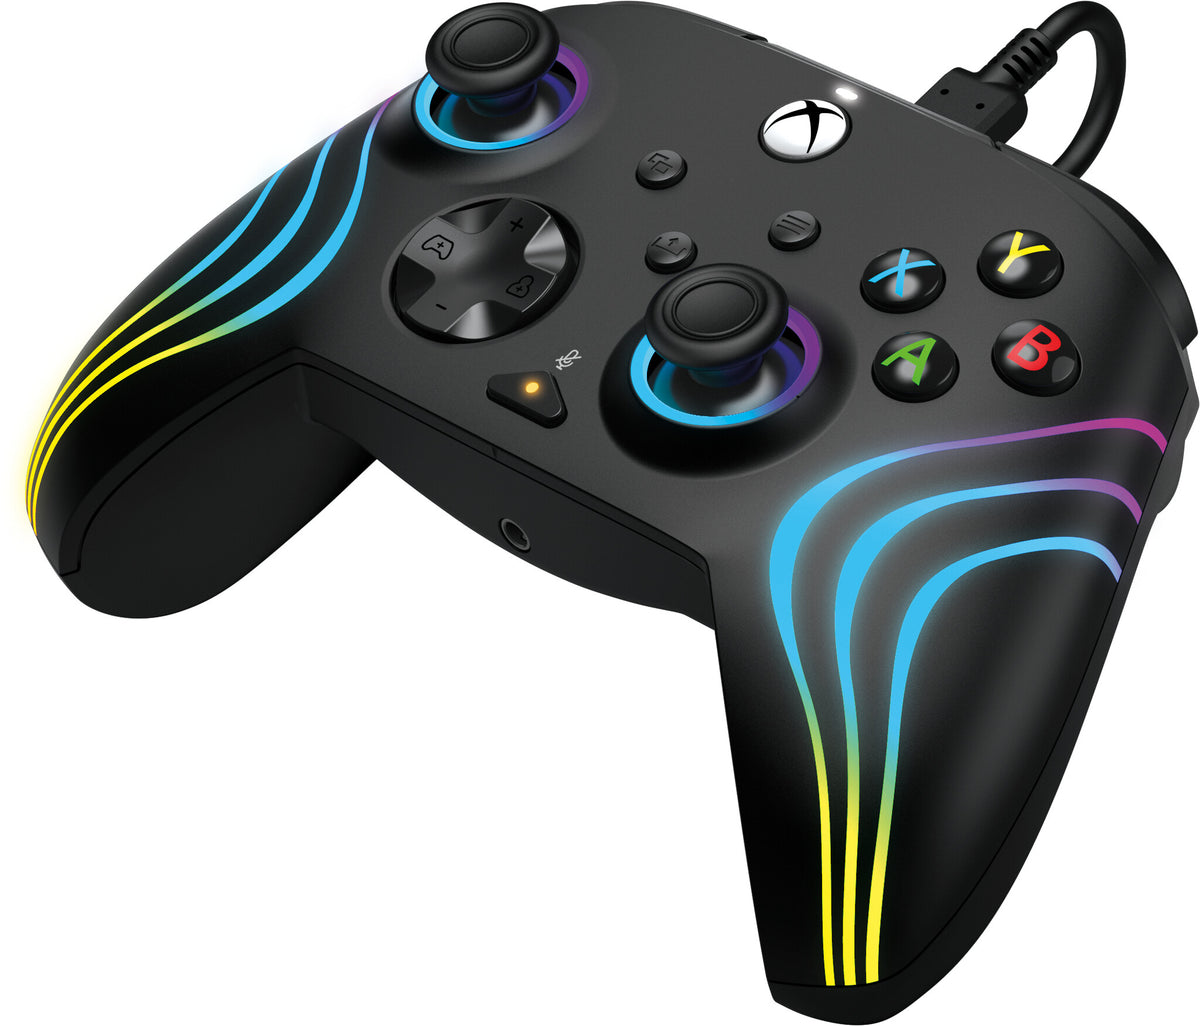 PDP Afterglow Wave - Wired USB Gamepad for PC / Xbox Series X|S in Black